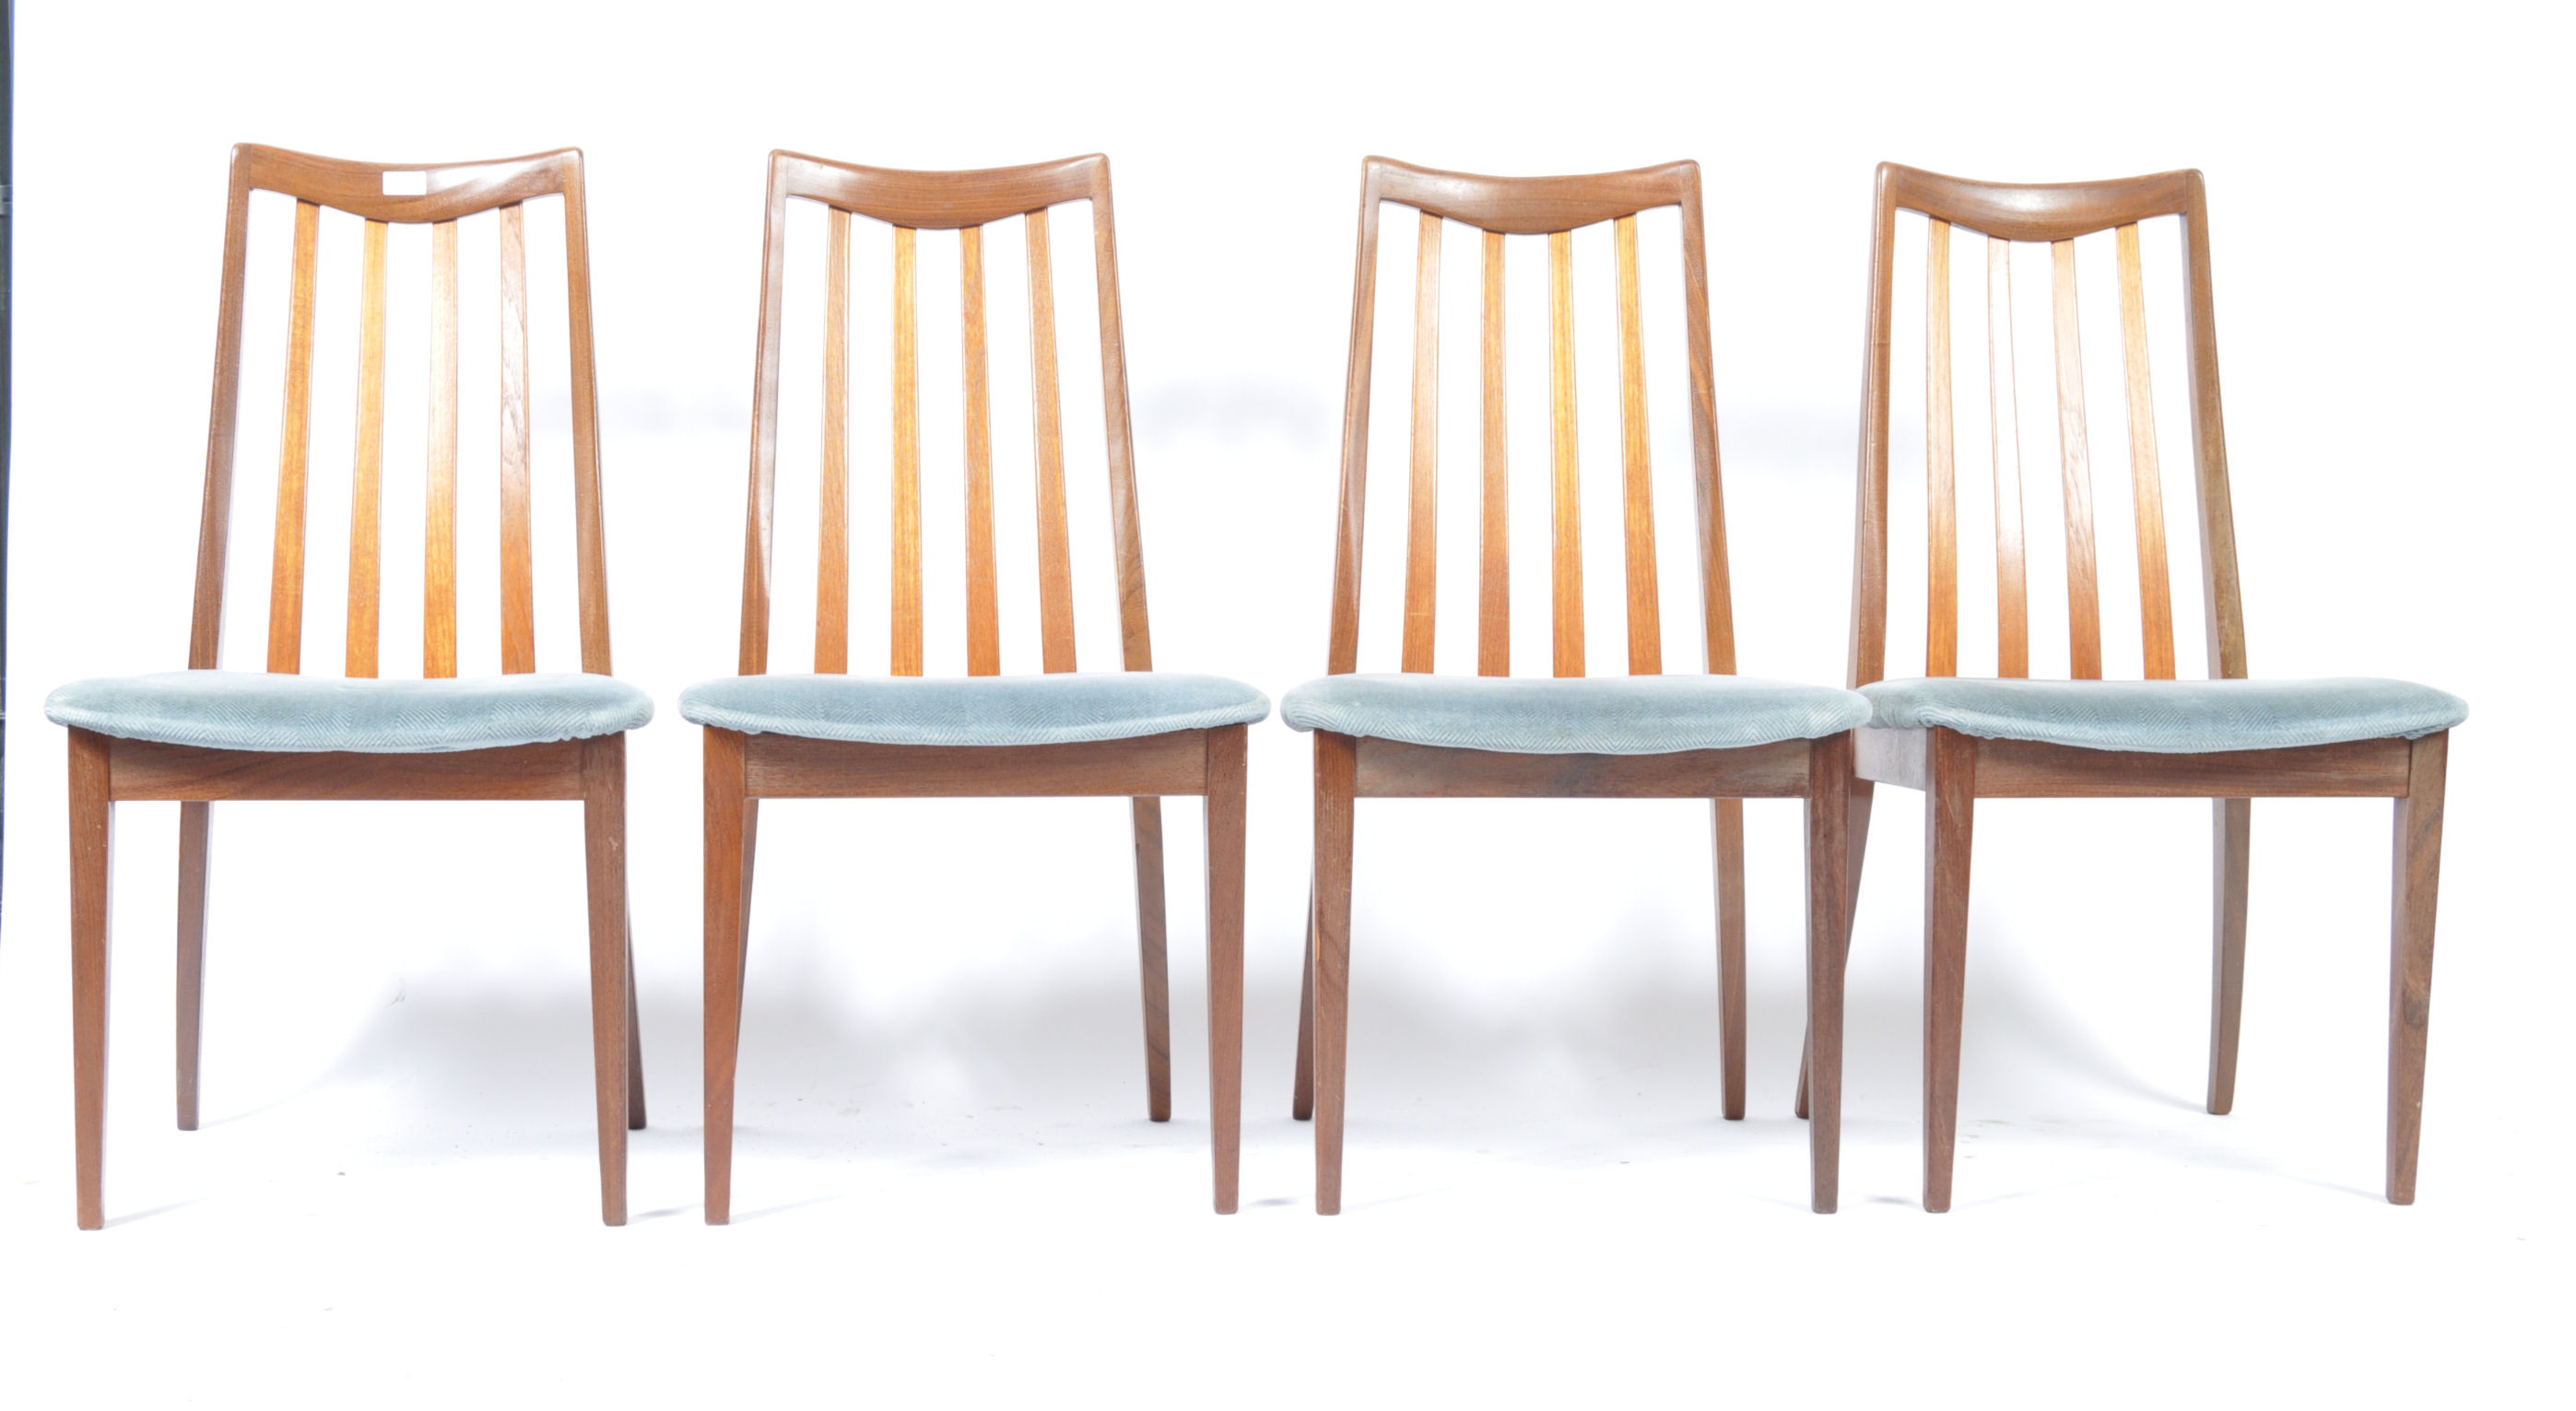 LESLIE DANDY FOR G-PLAN SET OF 4 TEAK WOOD DINING CHAIRS - Image 3 of 5